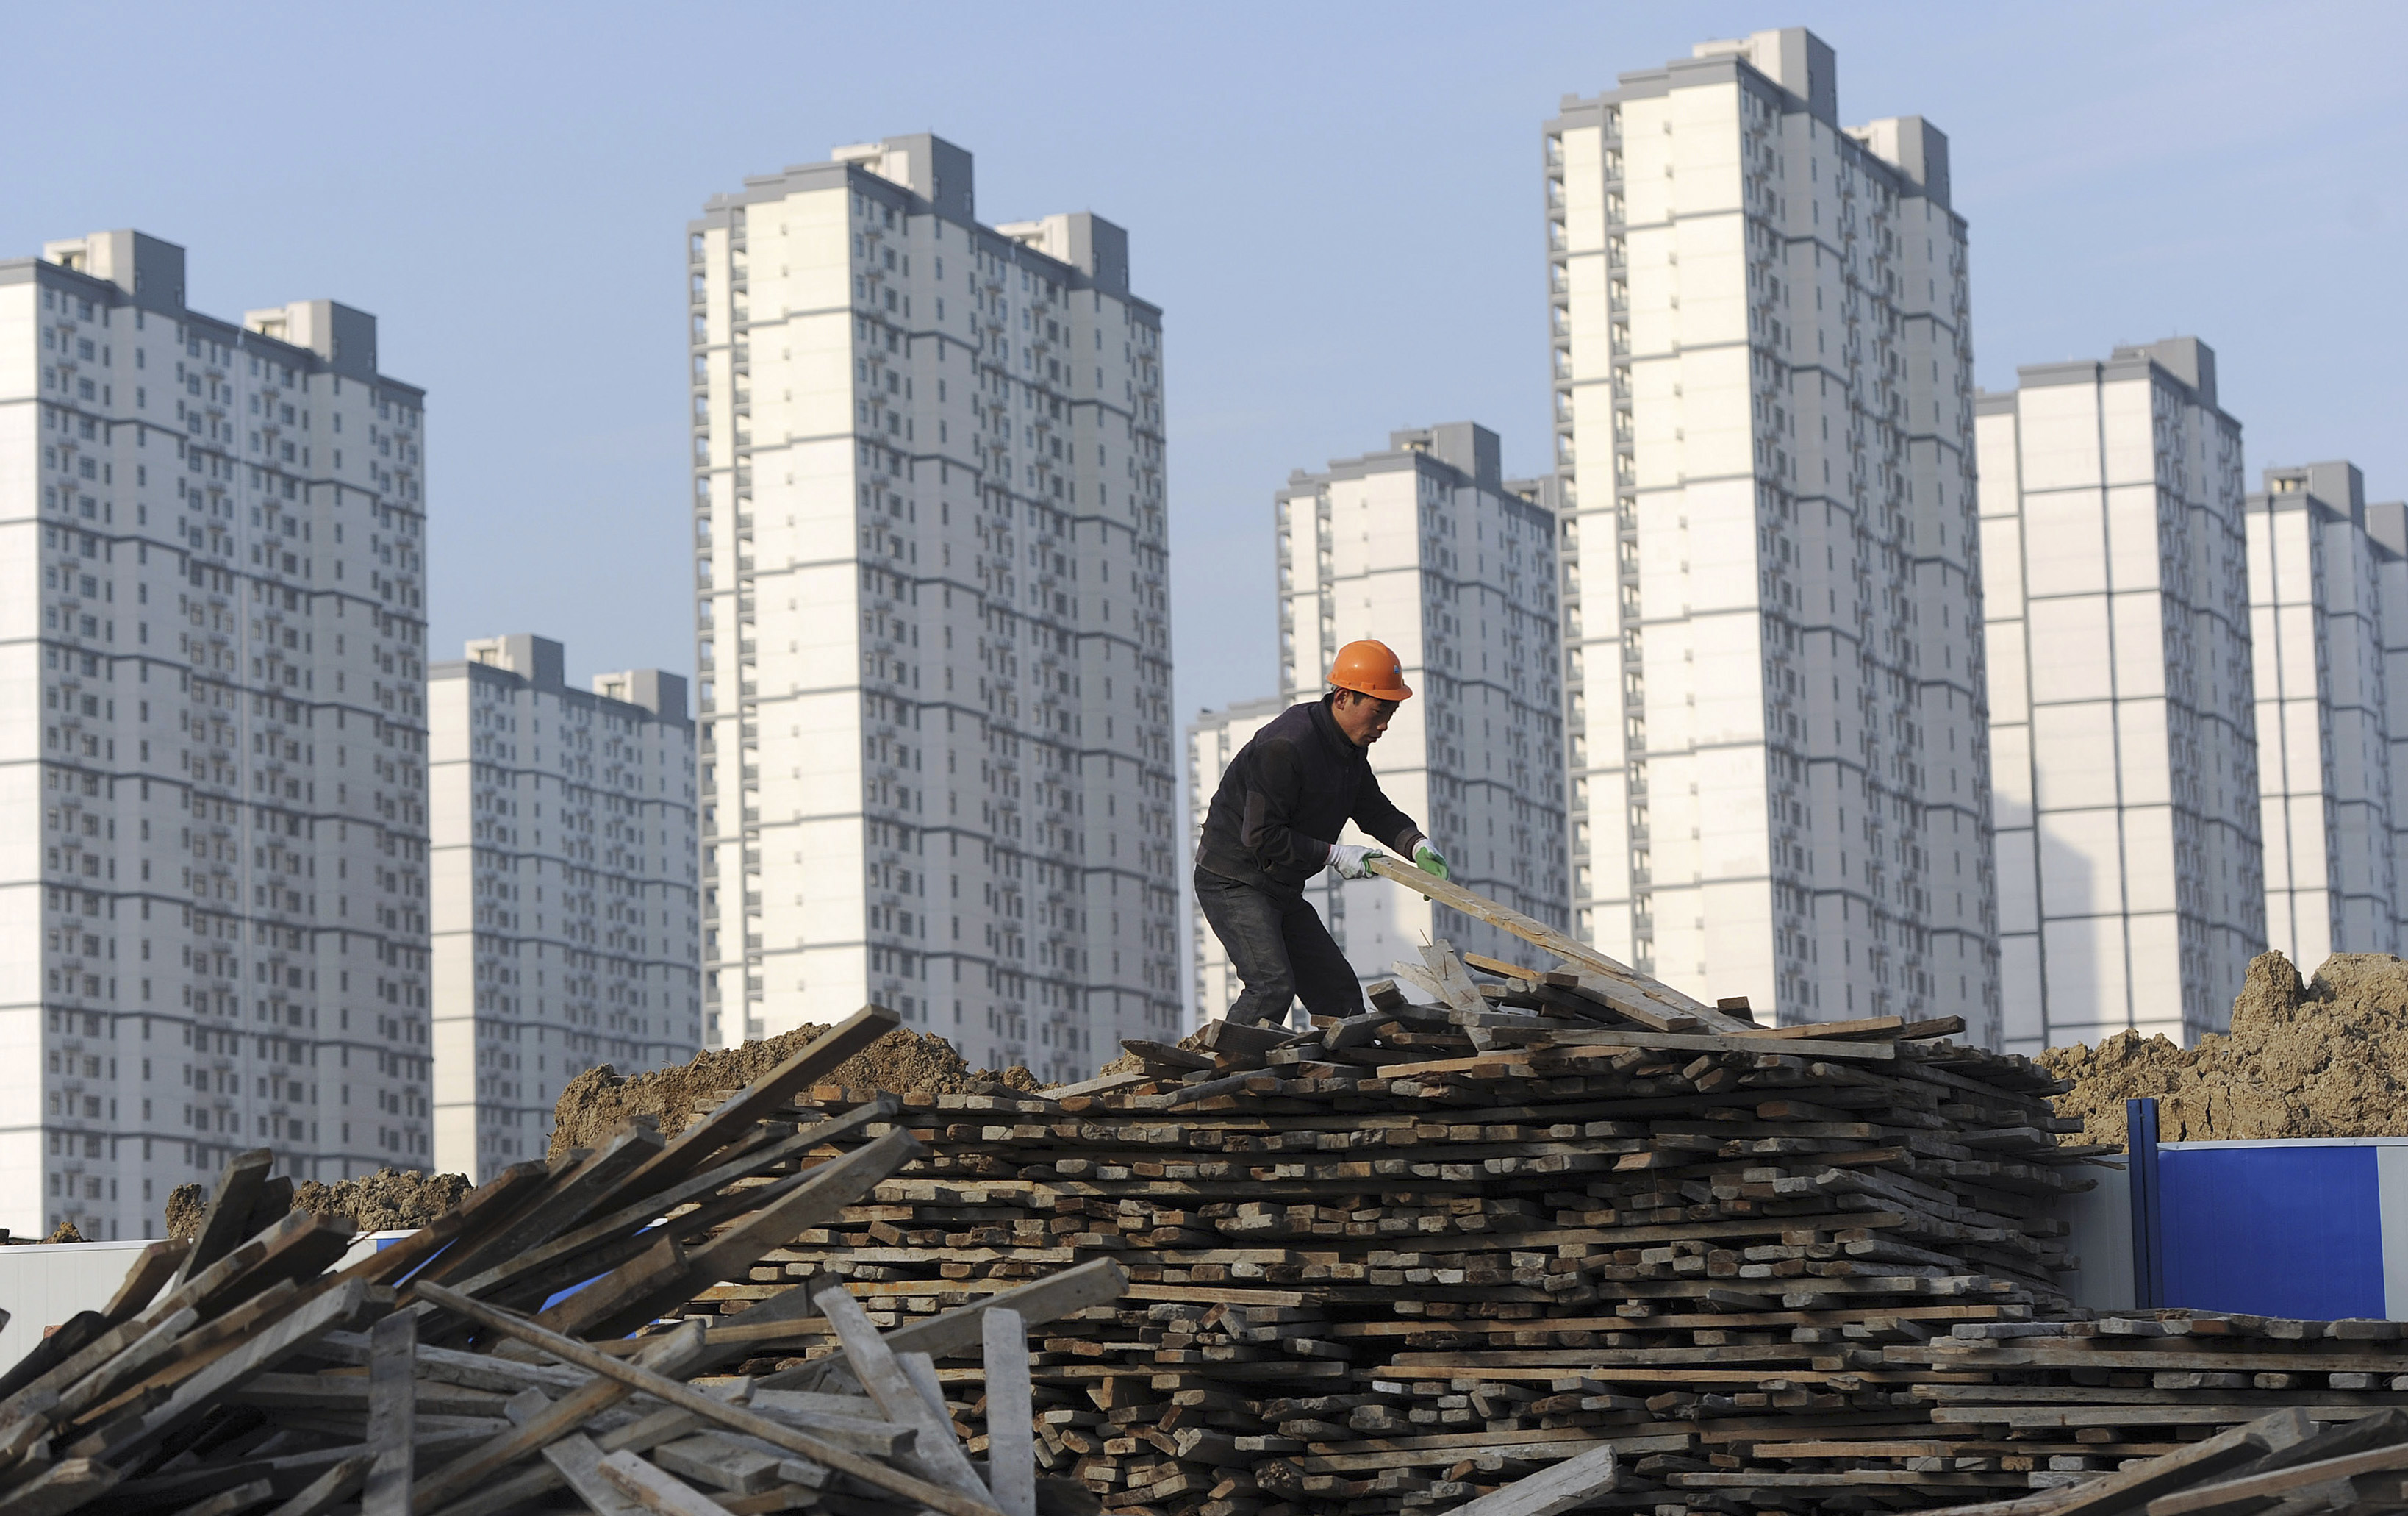 A labourer selects wooden planks as he works at a residential construction site in Hefei